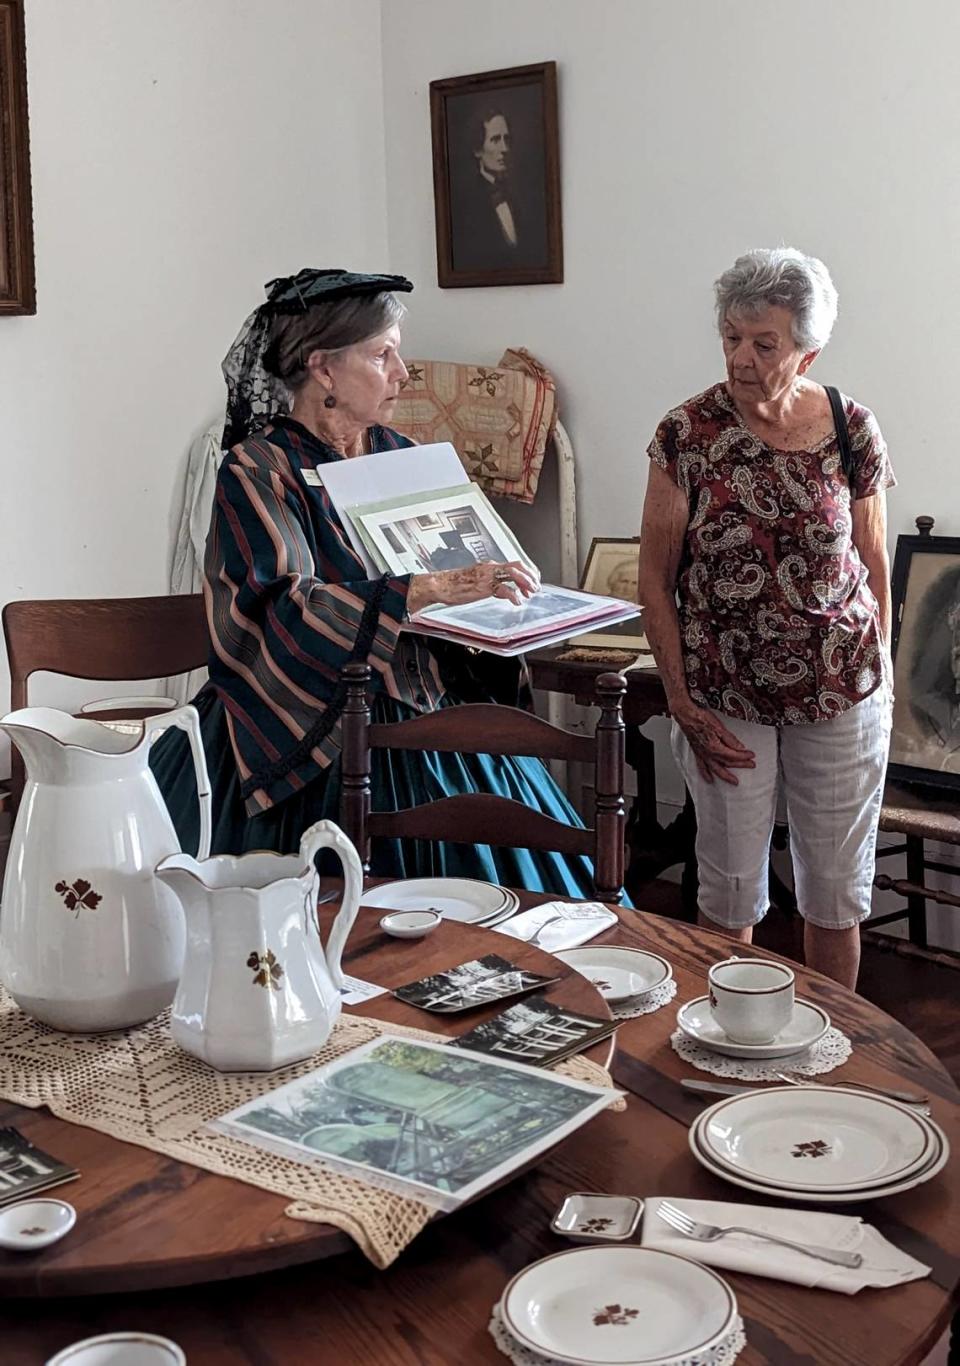 The United Daughters of the Confederacy hosts tours of Gamble Plantation at its annual Spring Open House, held in partnership with Florida State Parks.